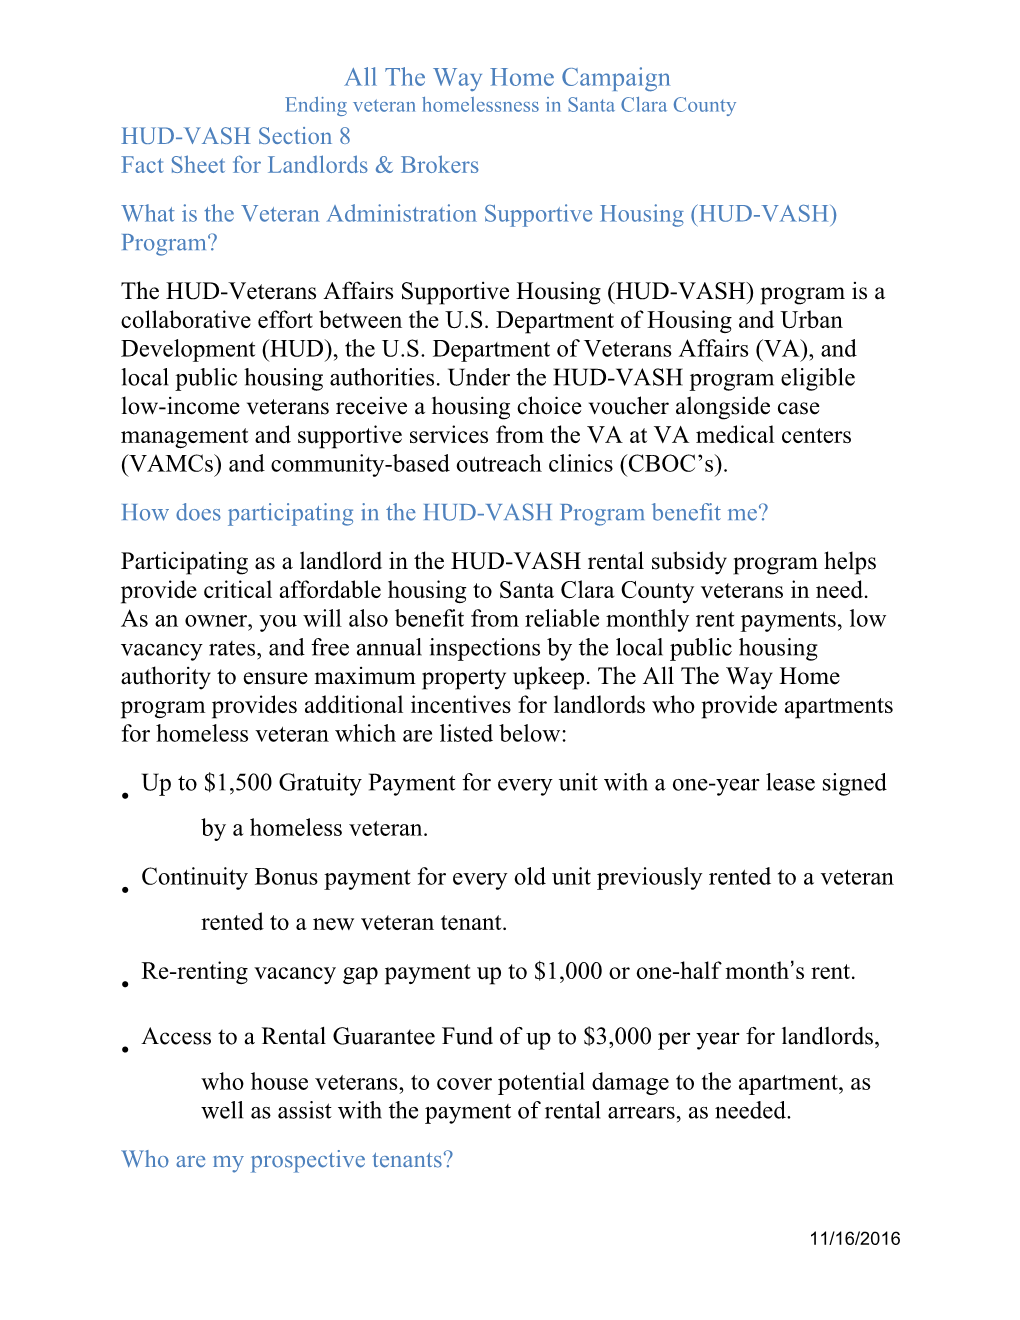 What Is the Veteran Administration Supportive Housing (HUD-VASH) Program?